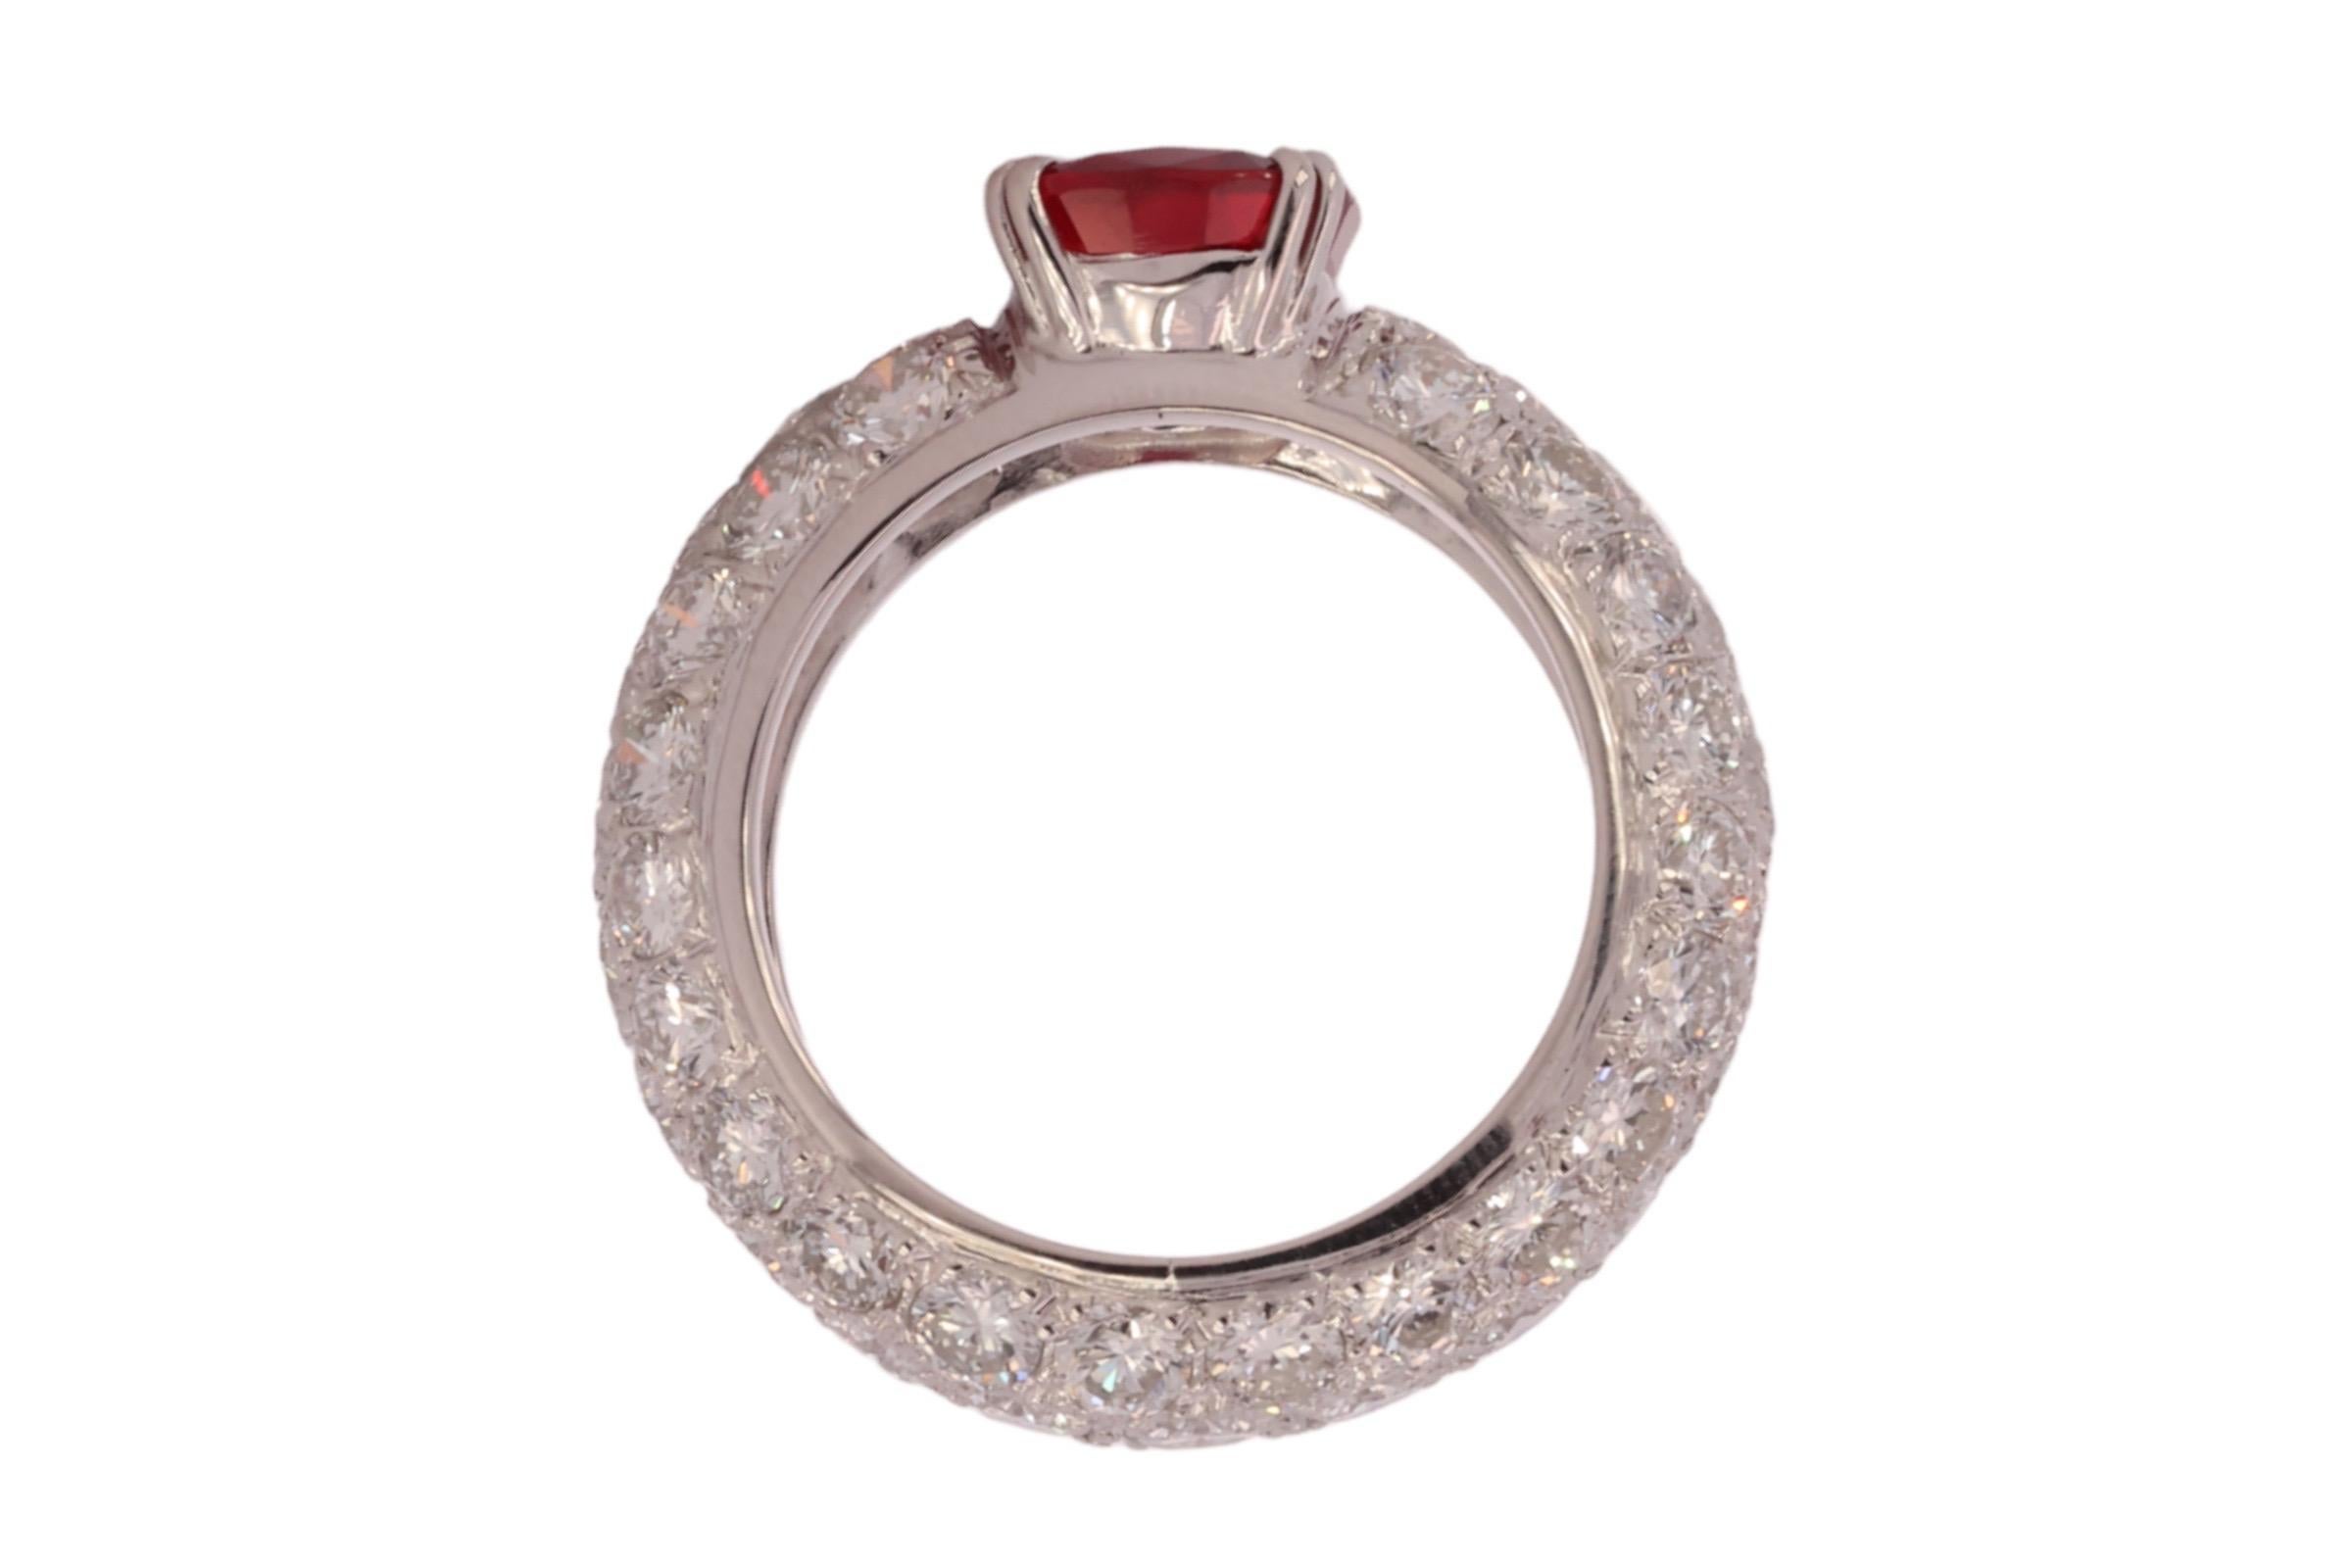 18 Karat White Gold Eternity Ring Diamonds 3.03ct Vivid Red Ruby GRS Certifified For Sale 3